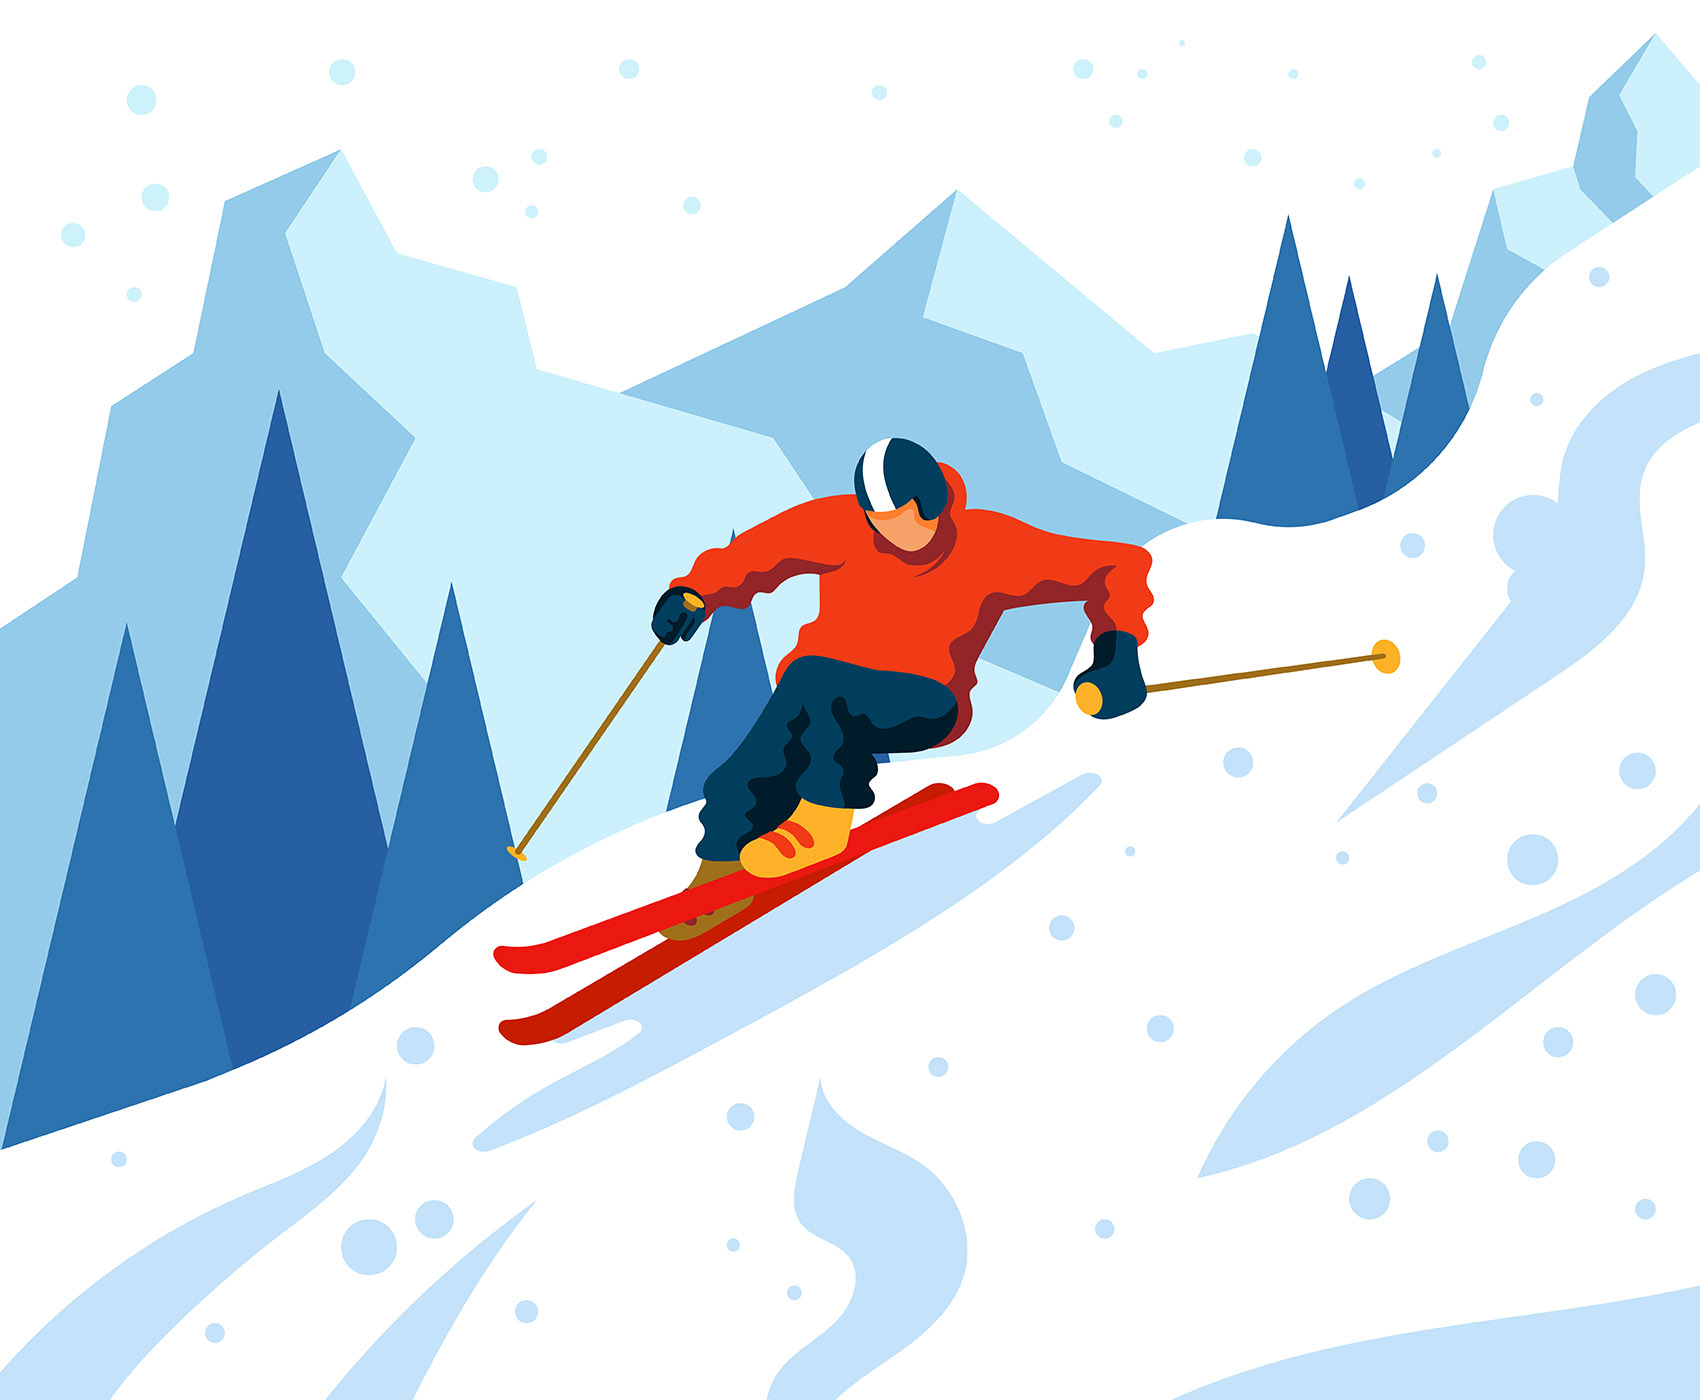 Browse 481 incredible Alpine Skiing vectors, icons, clipart graphics, and b...